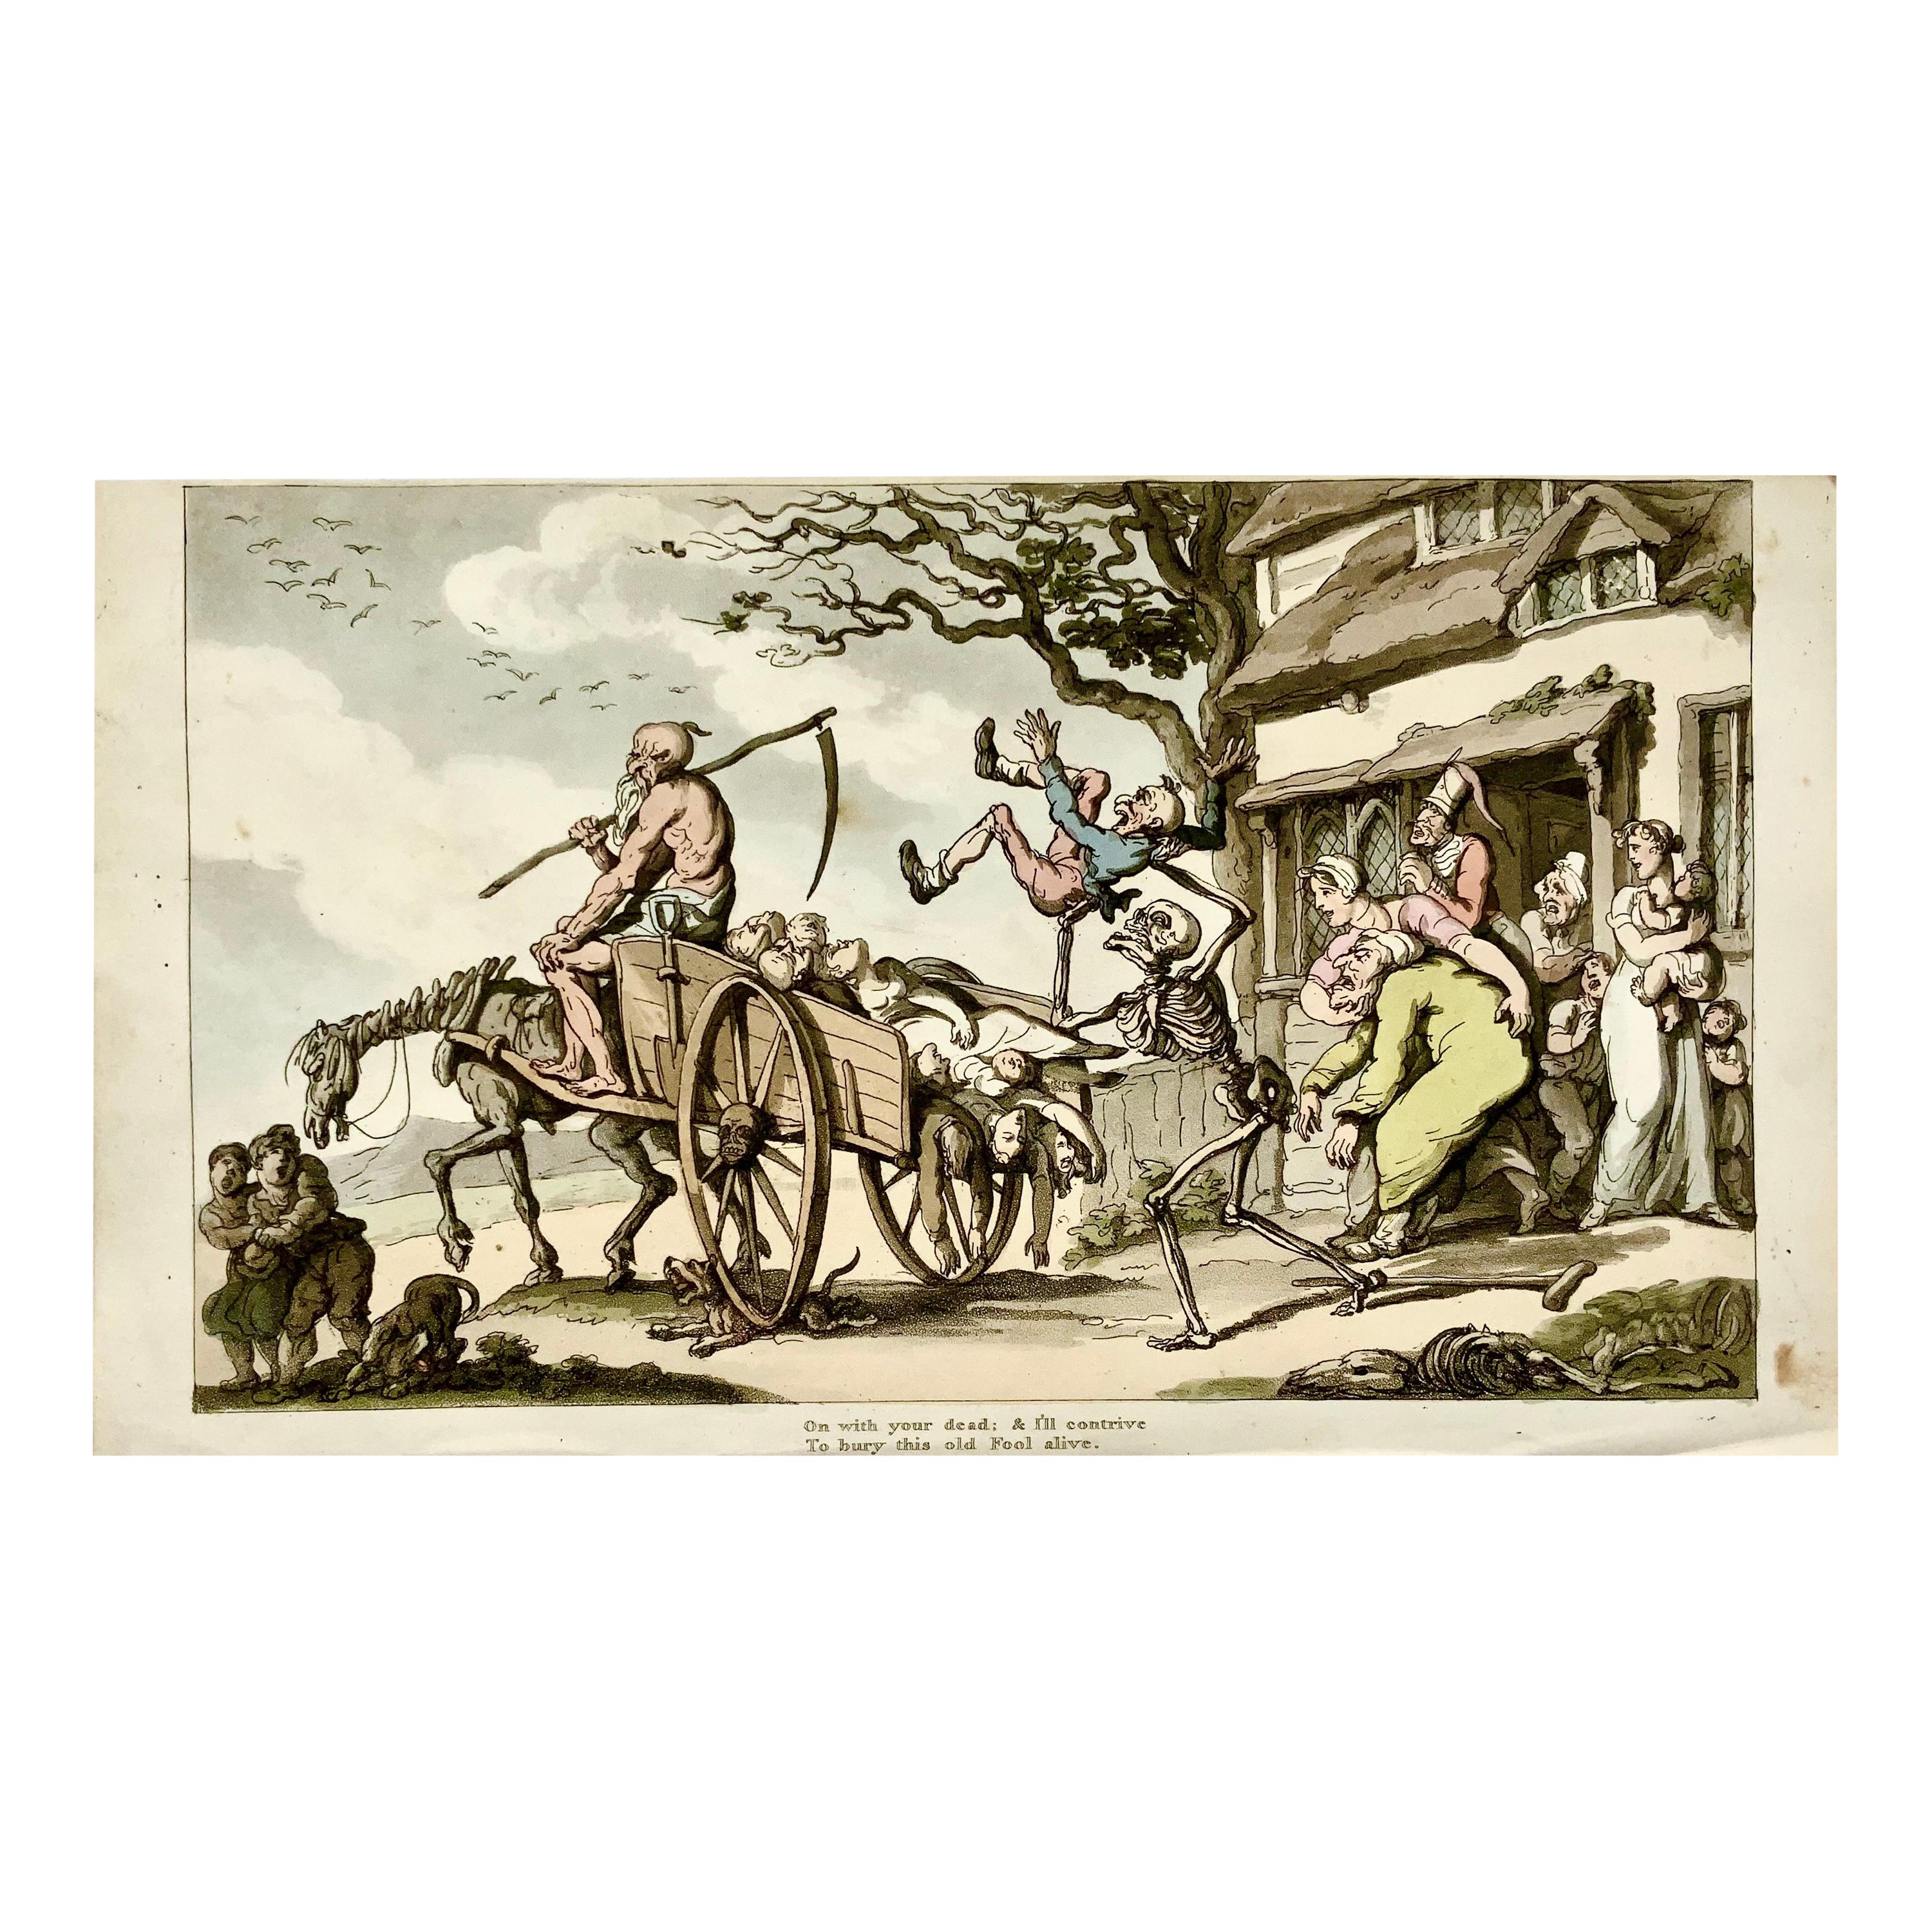 On with your dead: & I’ll contrive to hurry this old Fool alive.

Original Aquatint & Etching plate with original hand colour.

Full margins and only very minor marginal wear.

Rudolph Ackermann, London, 1815.

Thomas Rowlandson: Along with Hogarth,